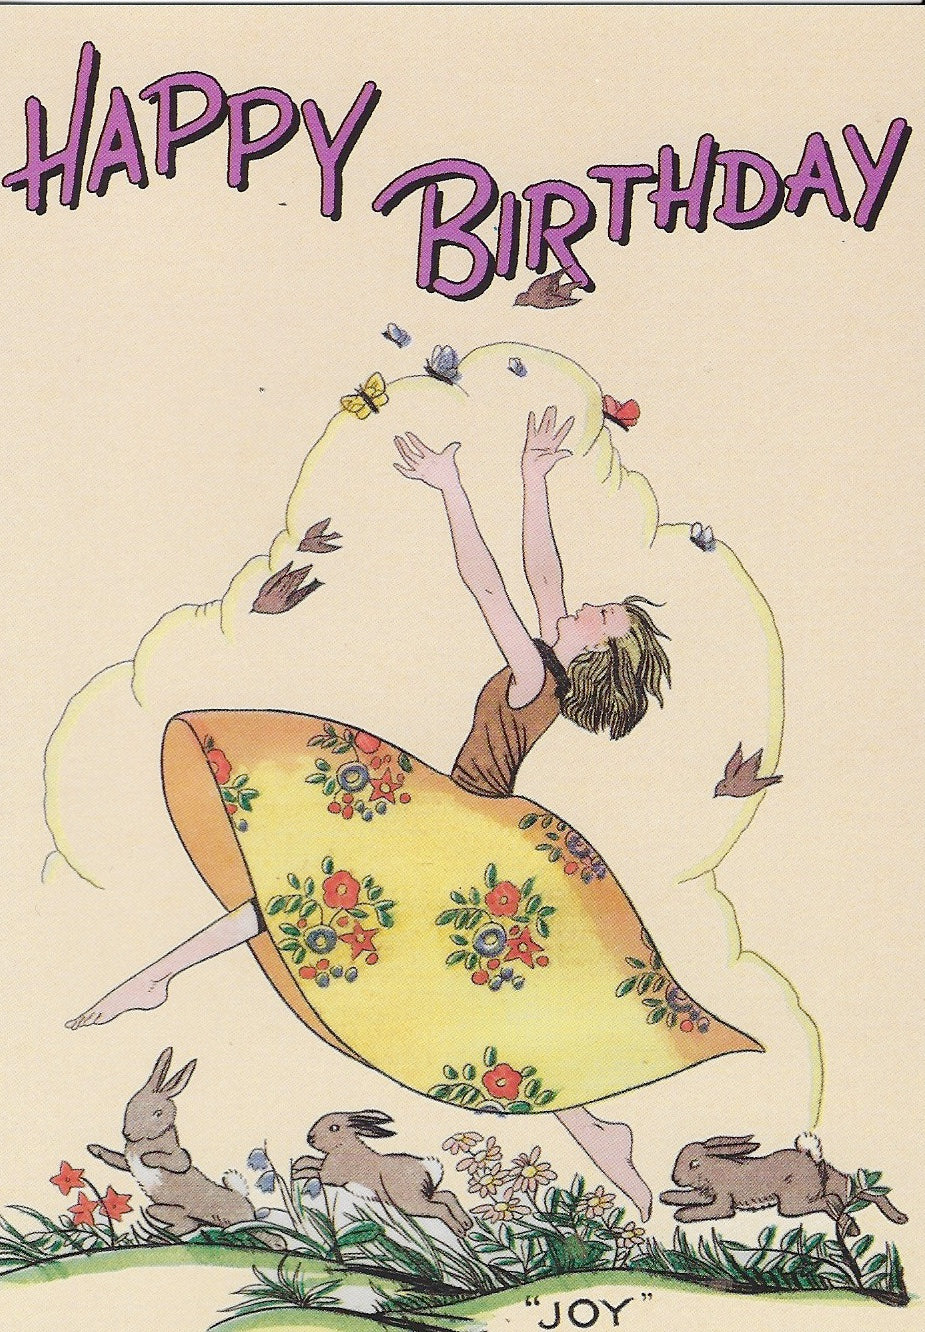 A vintage "Happy Birthday" Greeting Cards illustration featuring a joyful girl dancing with a large yellow skirt among frolicking rabbits and flowers, with birds circling above, conveying true wishes.